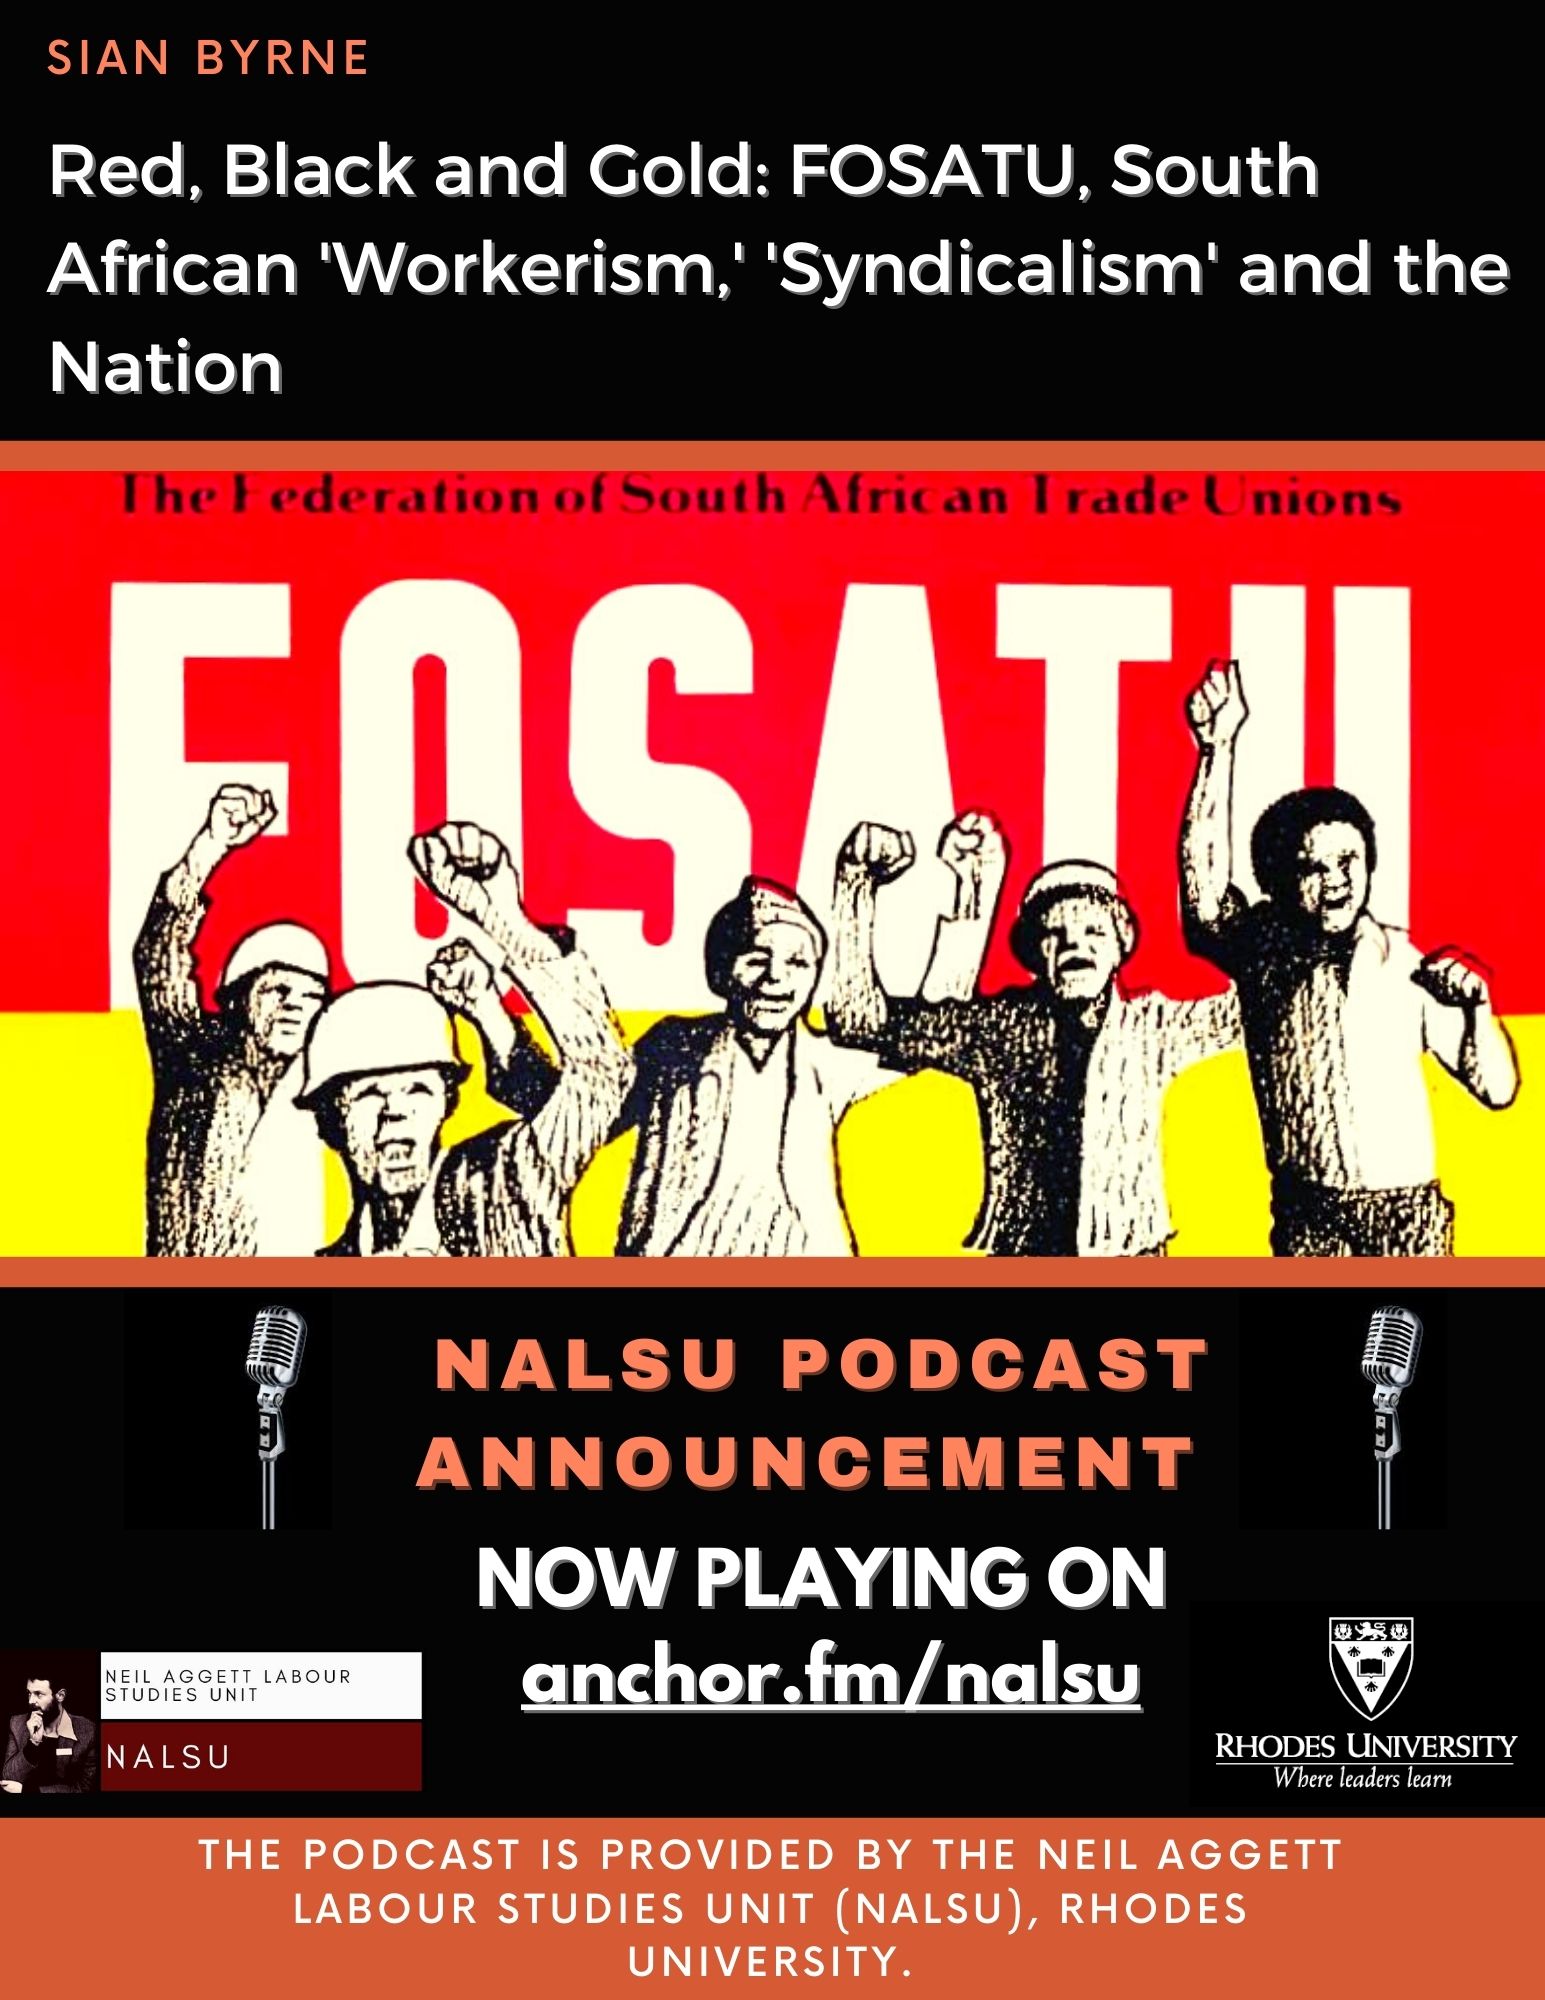 "Red, Black and Gold: FOSATU, South African 'Workerism,' 'Syndicalism' and the Nation."